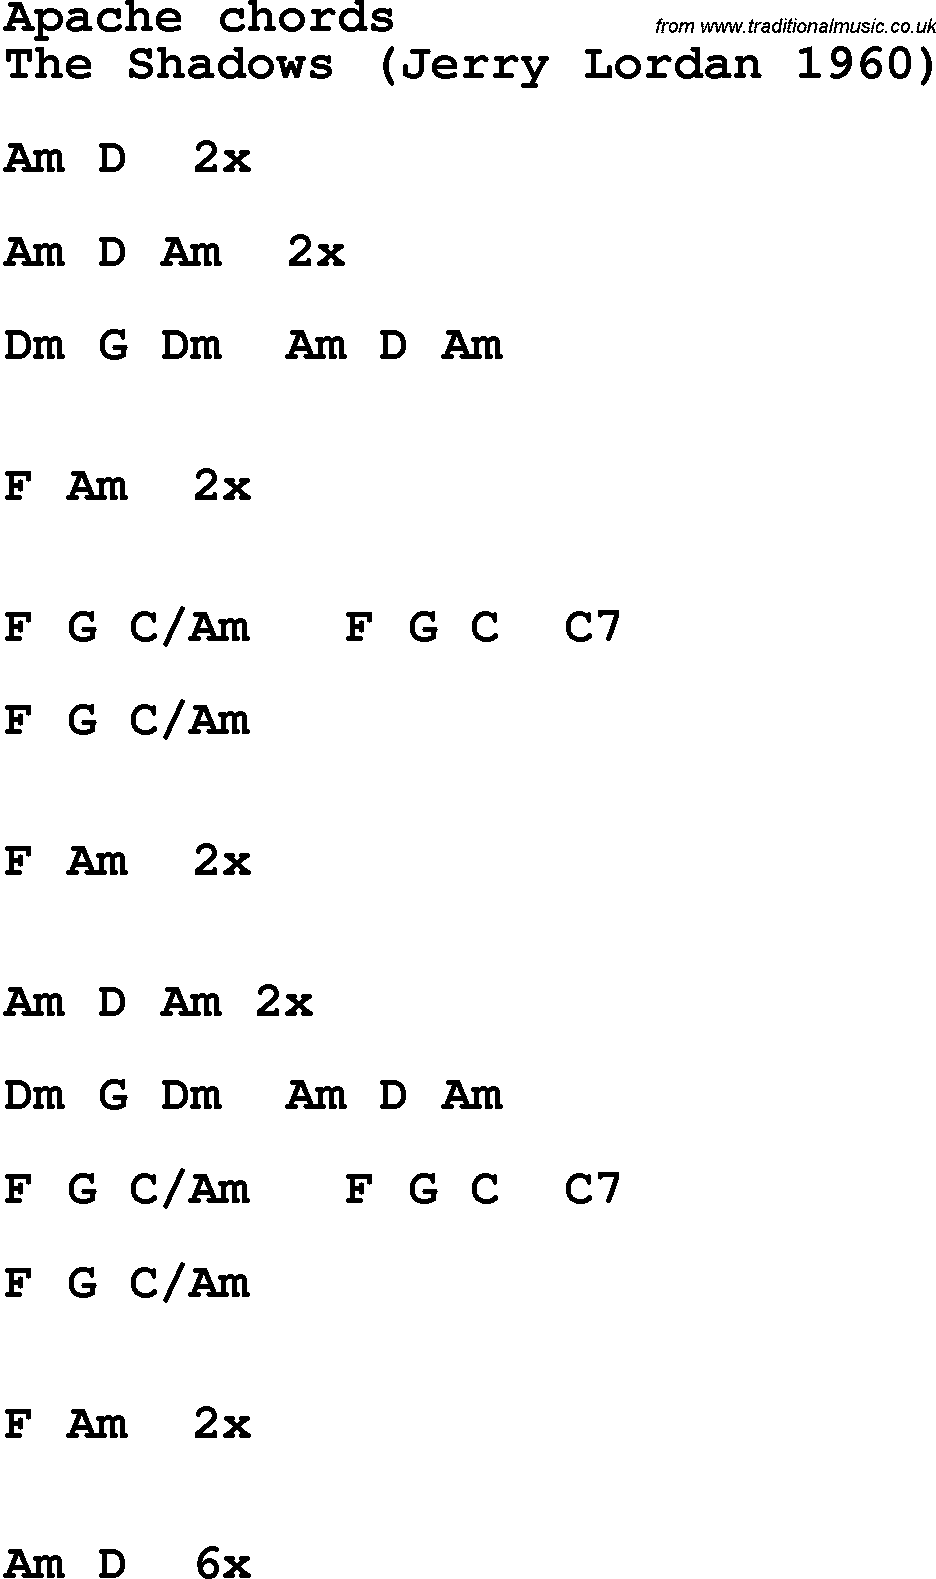 Song Lyrics with guitar chords for Apache